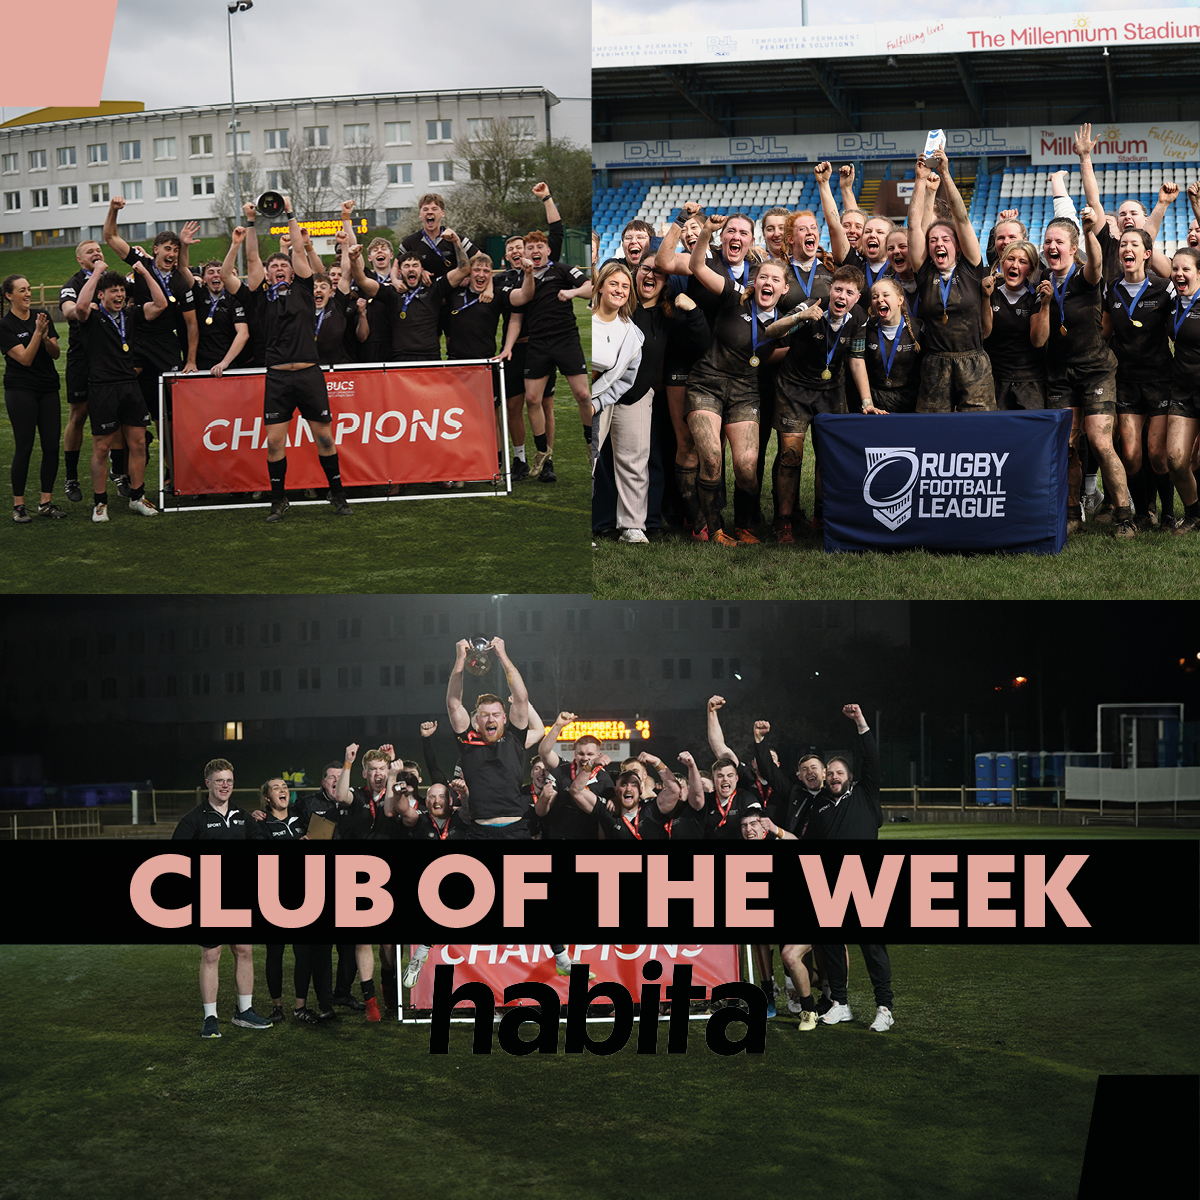 CLUB OF THE WEEK Sponsored by @habitanewcastle This weeks winners as selected by VP SPORT Harvey Burn are… 🏉 RUGBY LEAGUE 🏉 They've done the treble treble, Men's 1st team & 2nd team won the league and cup, and the womens won the league! WHAT A SEASON! 🏉🏉